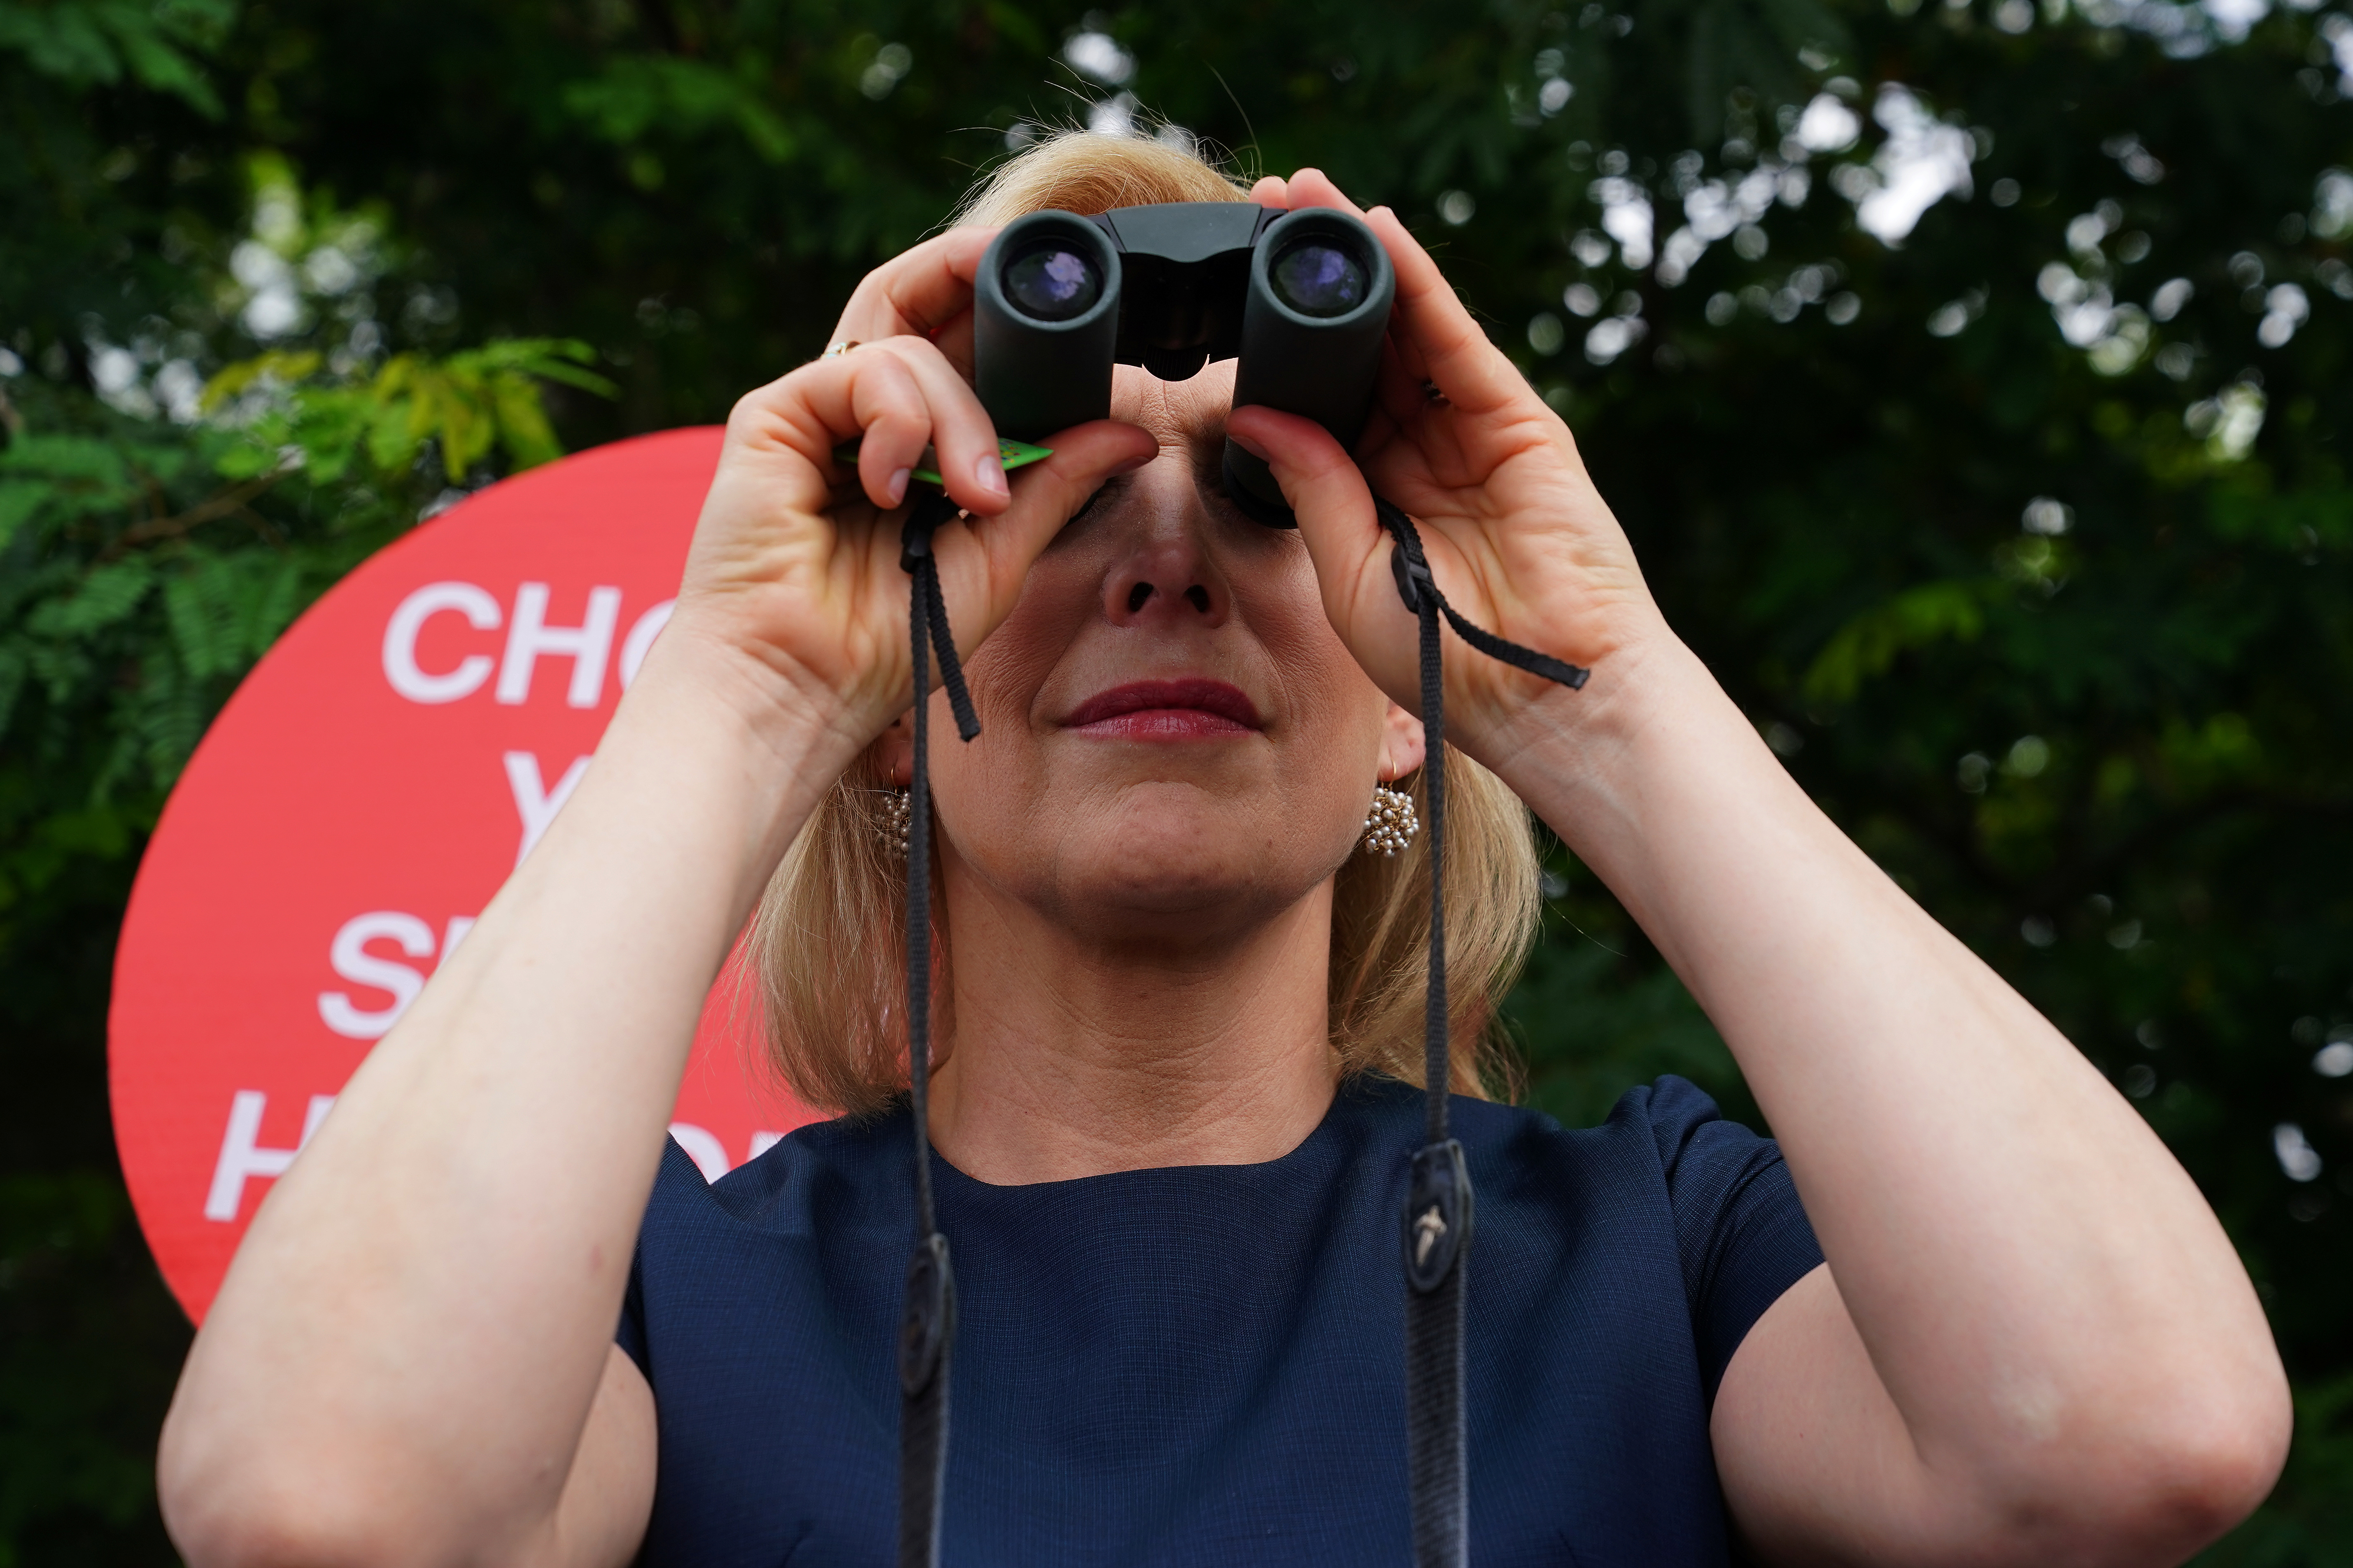 United States Senator Kirsten Gillibrand uses binoculars to look at youths incarcerated at a dentition facility near Miami in Homestead, Florida, U.S., June 28, 2019. REUTERS/Carlo Allegri